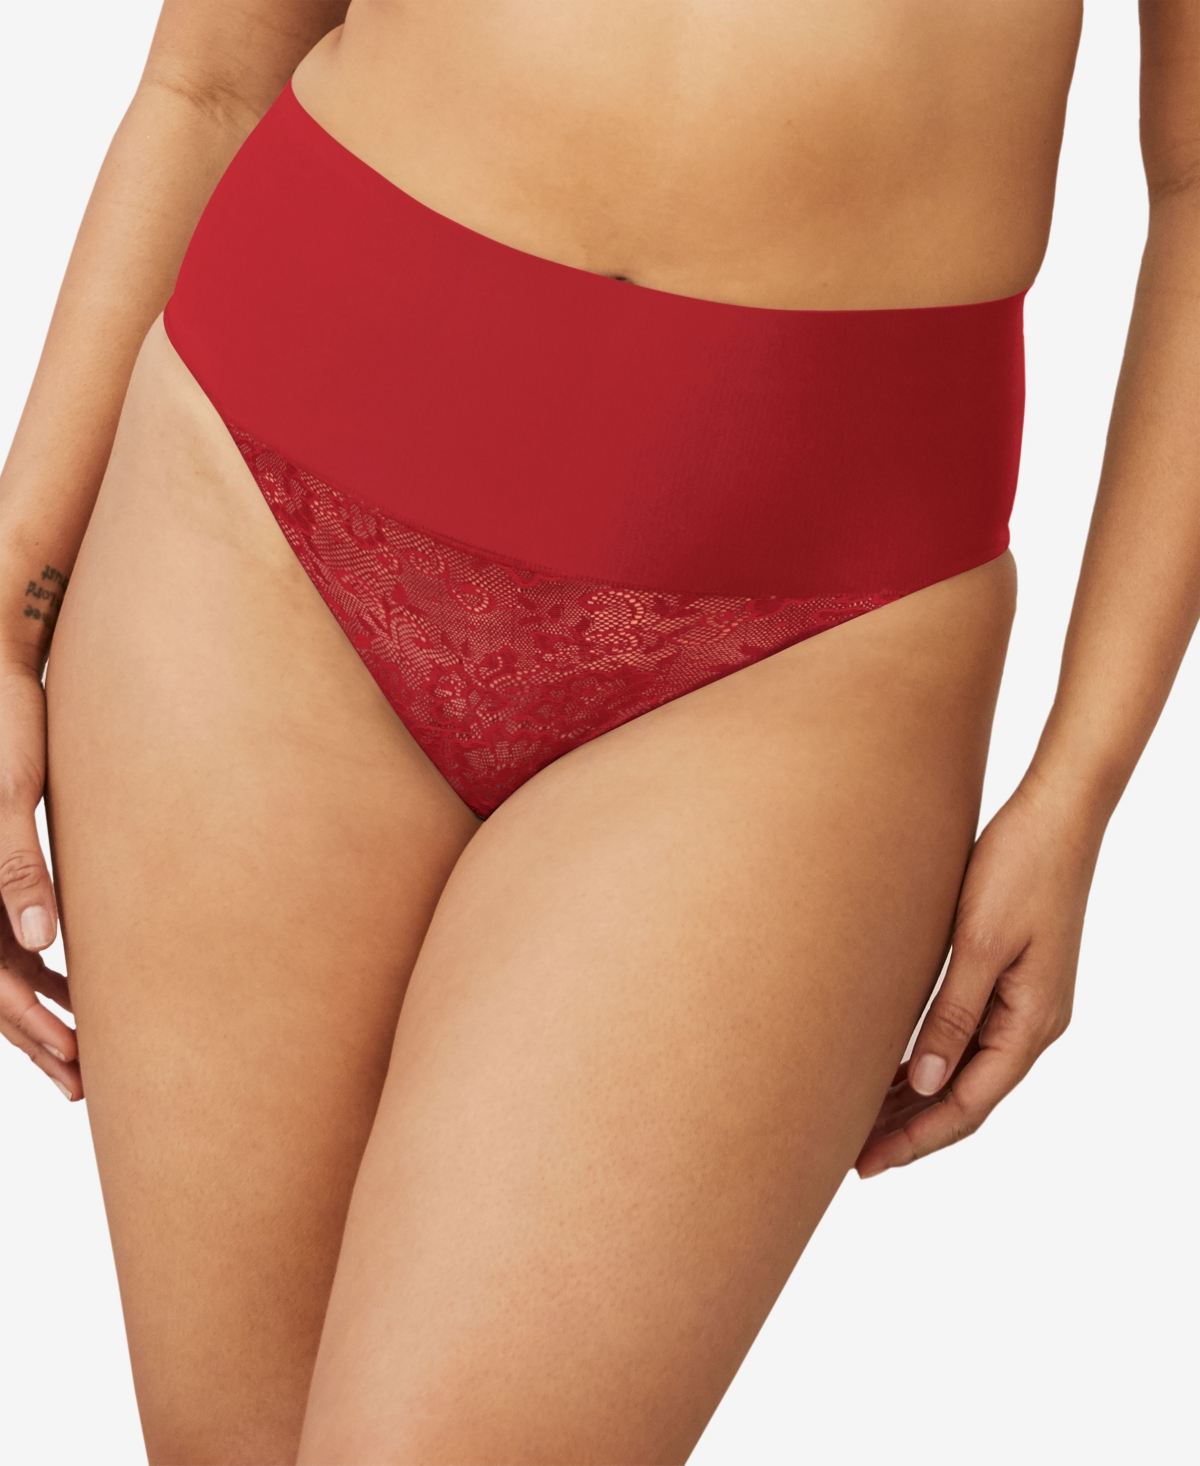 Tame Your Tummy Lace Thong DM0049 - Vintage Car Red